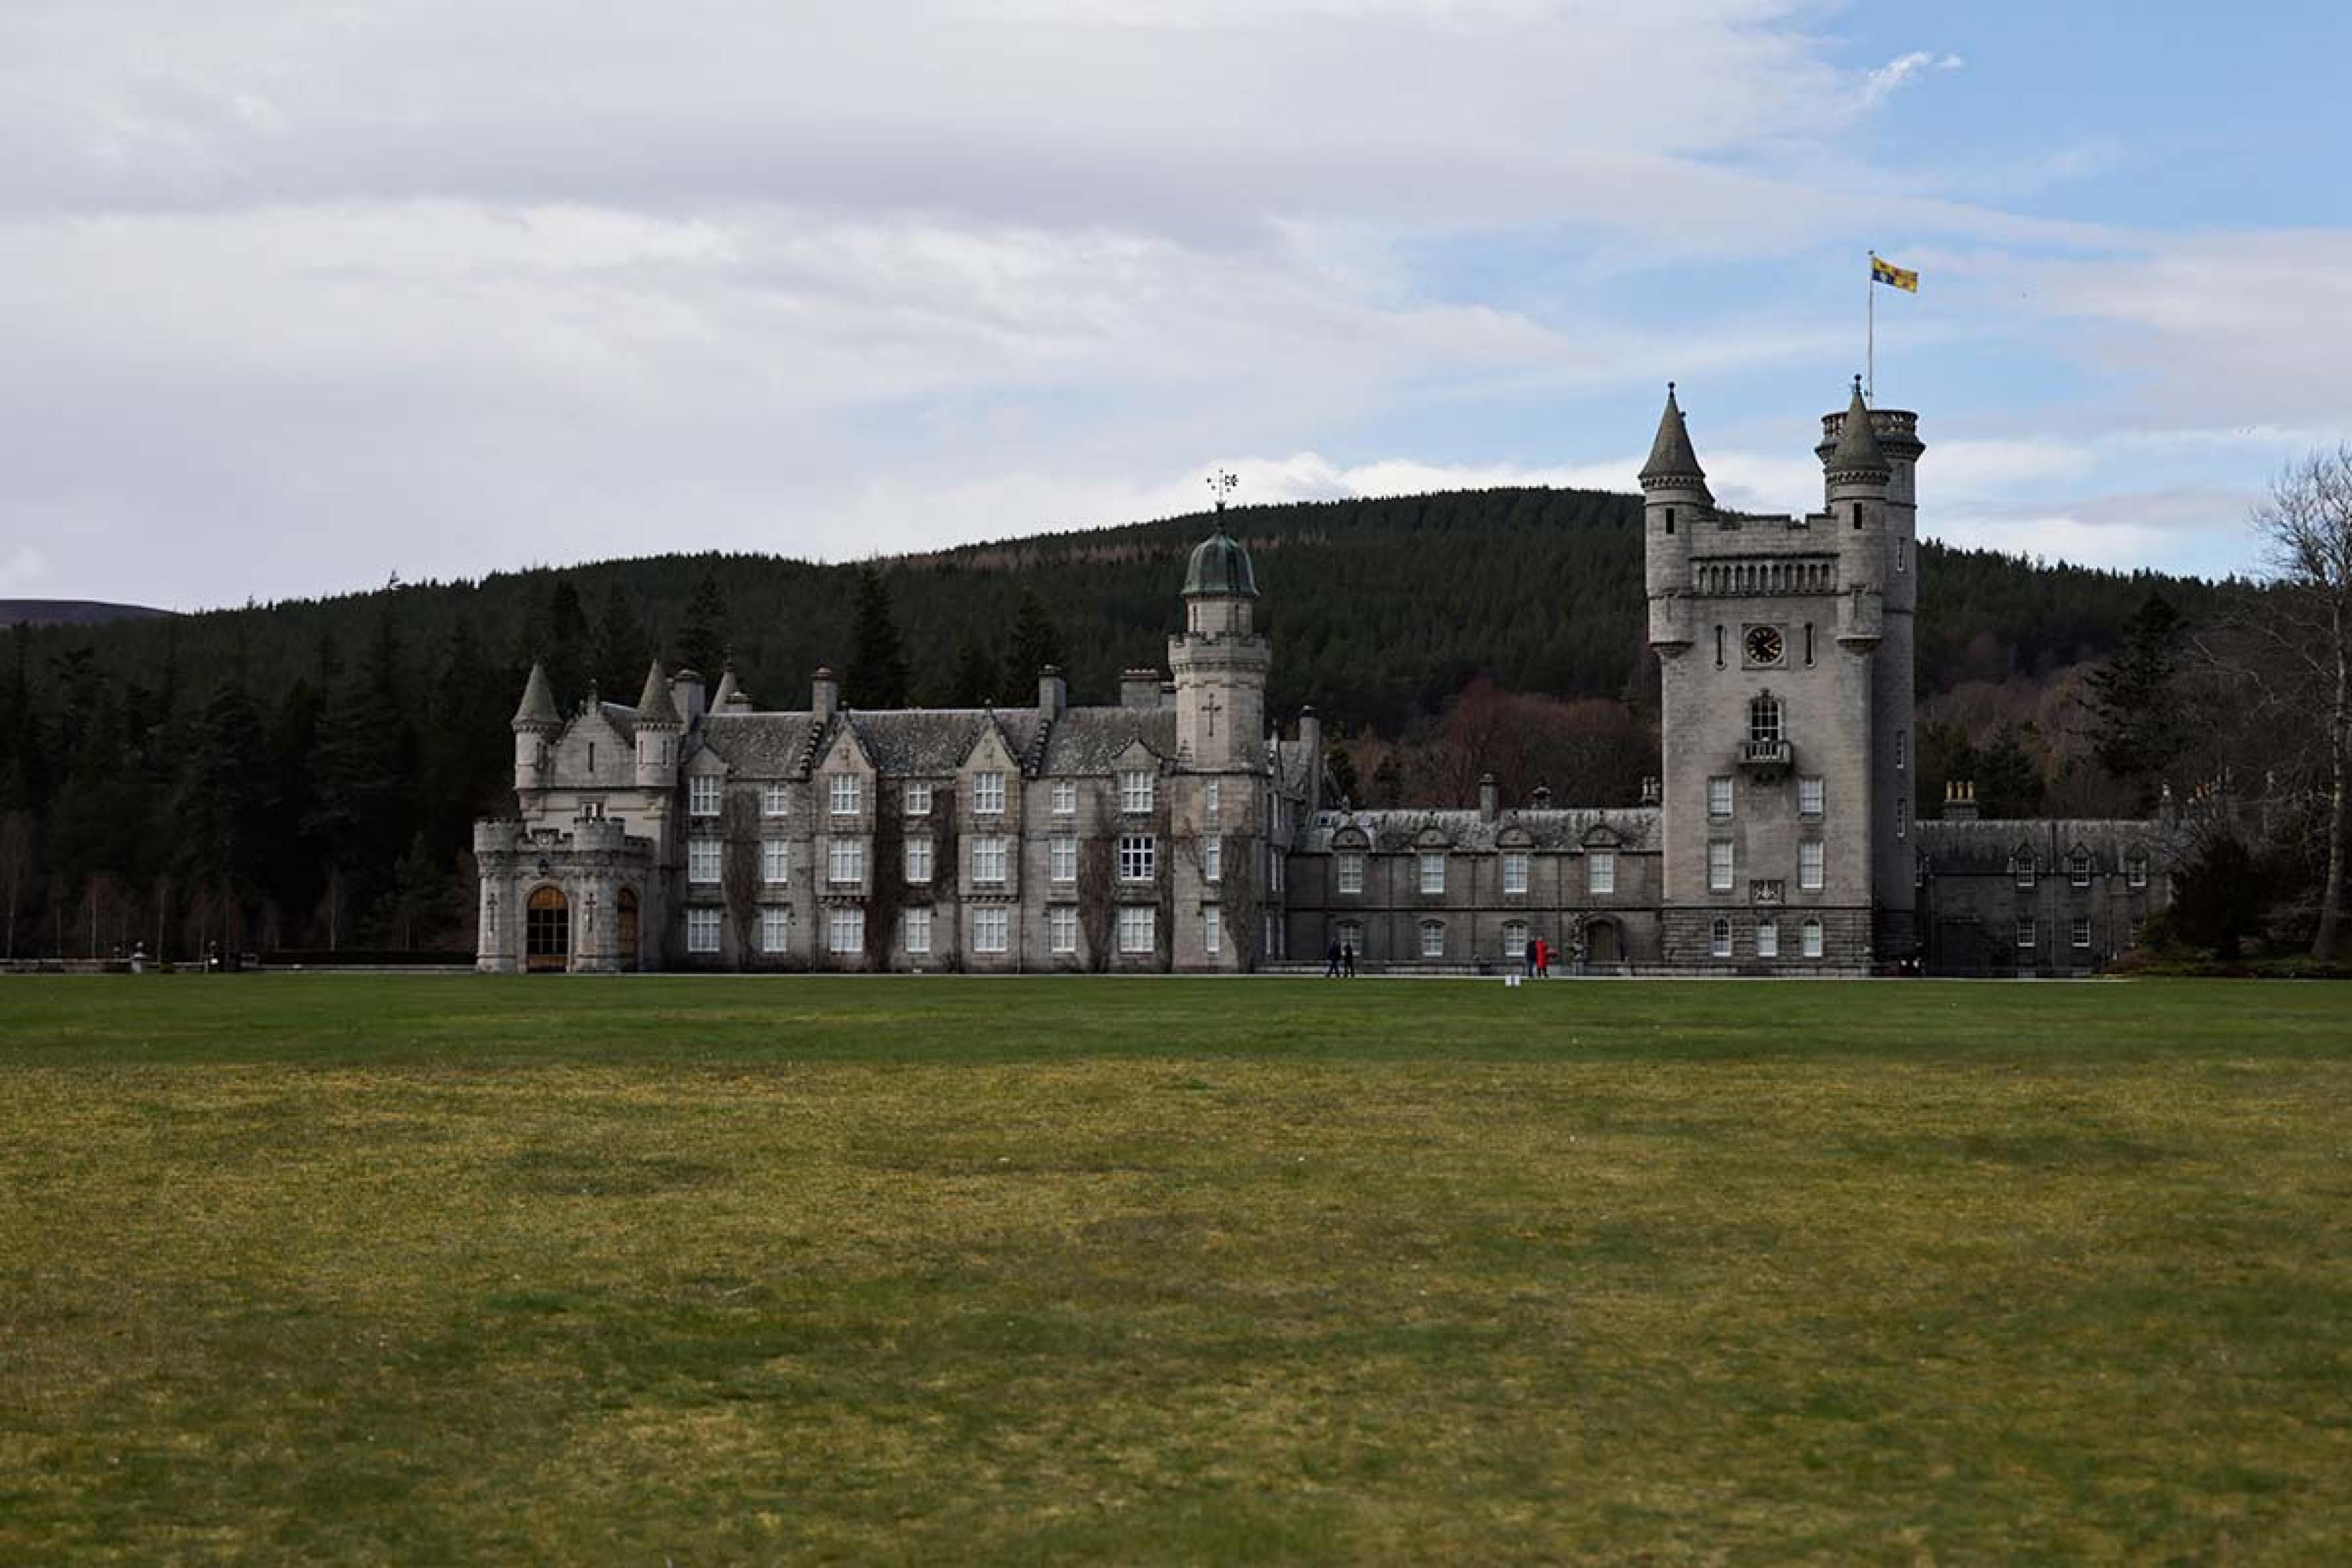 stone castle in Scotland with a long green lawn